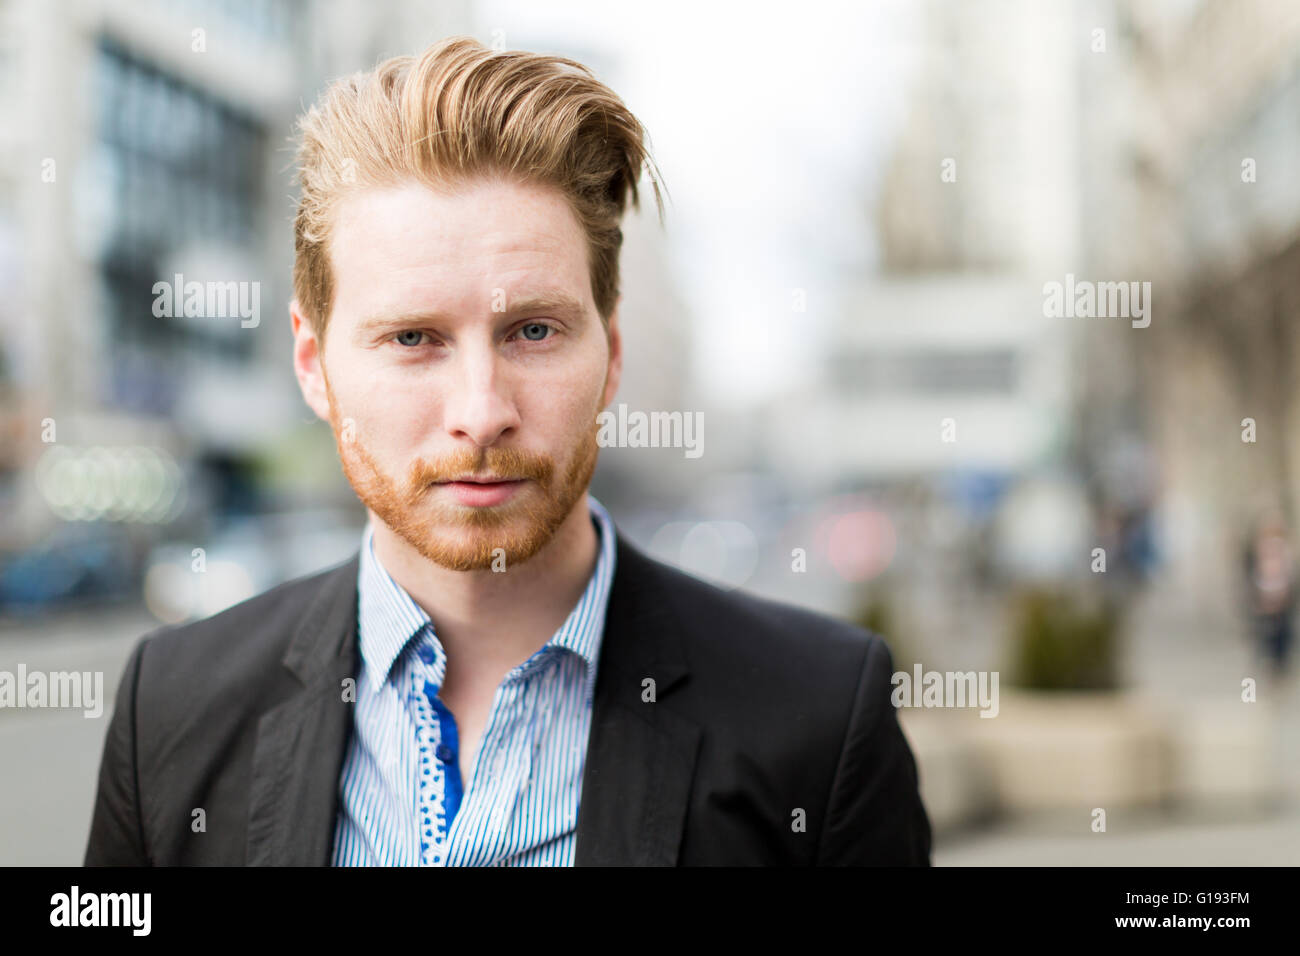 Businessman portrait with blurred out city buildings in the background Stock Photo